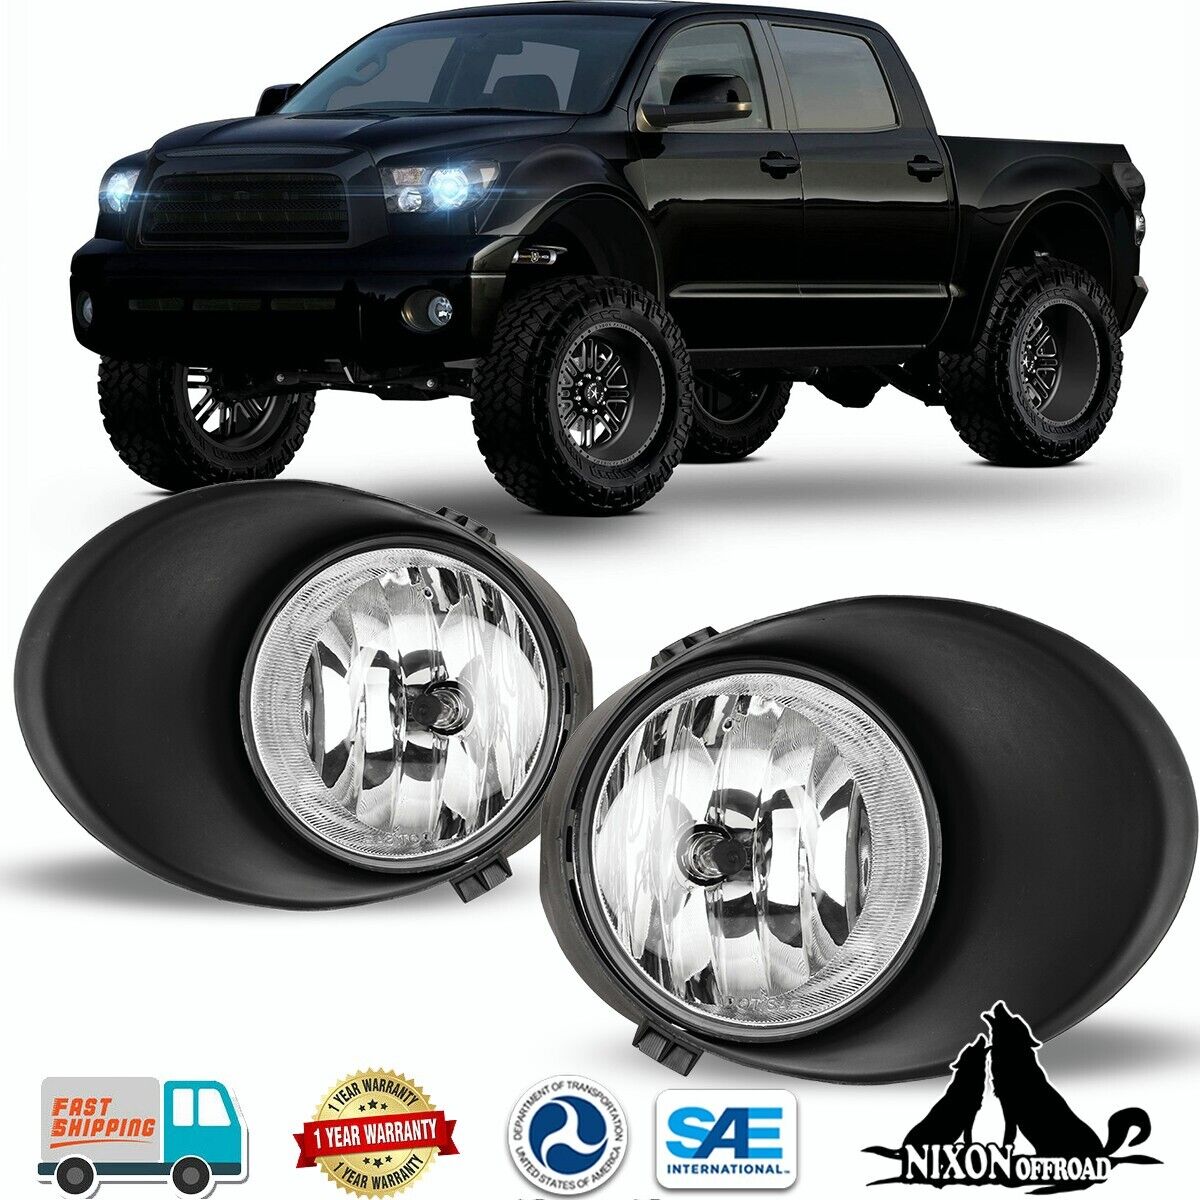 Pair Fog Lights For 2007-2013 Toyota Tundra Front Driving Bumper Lamps w/Wiring